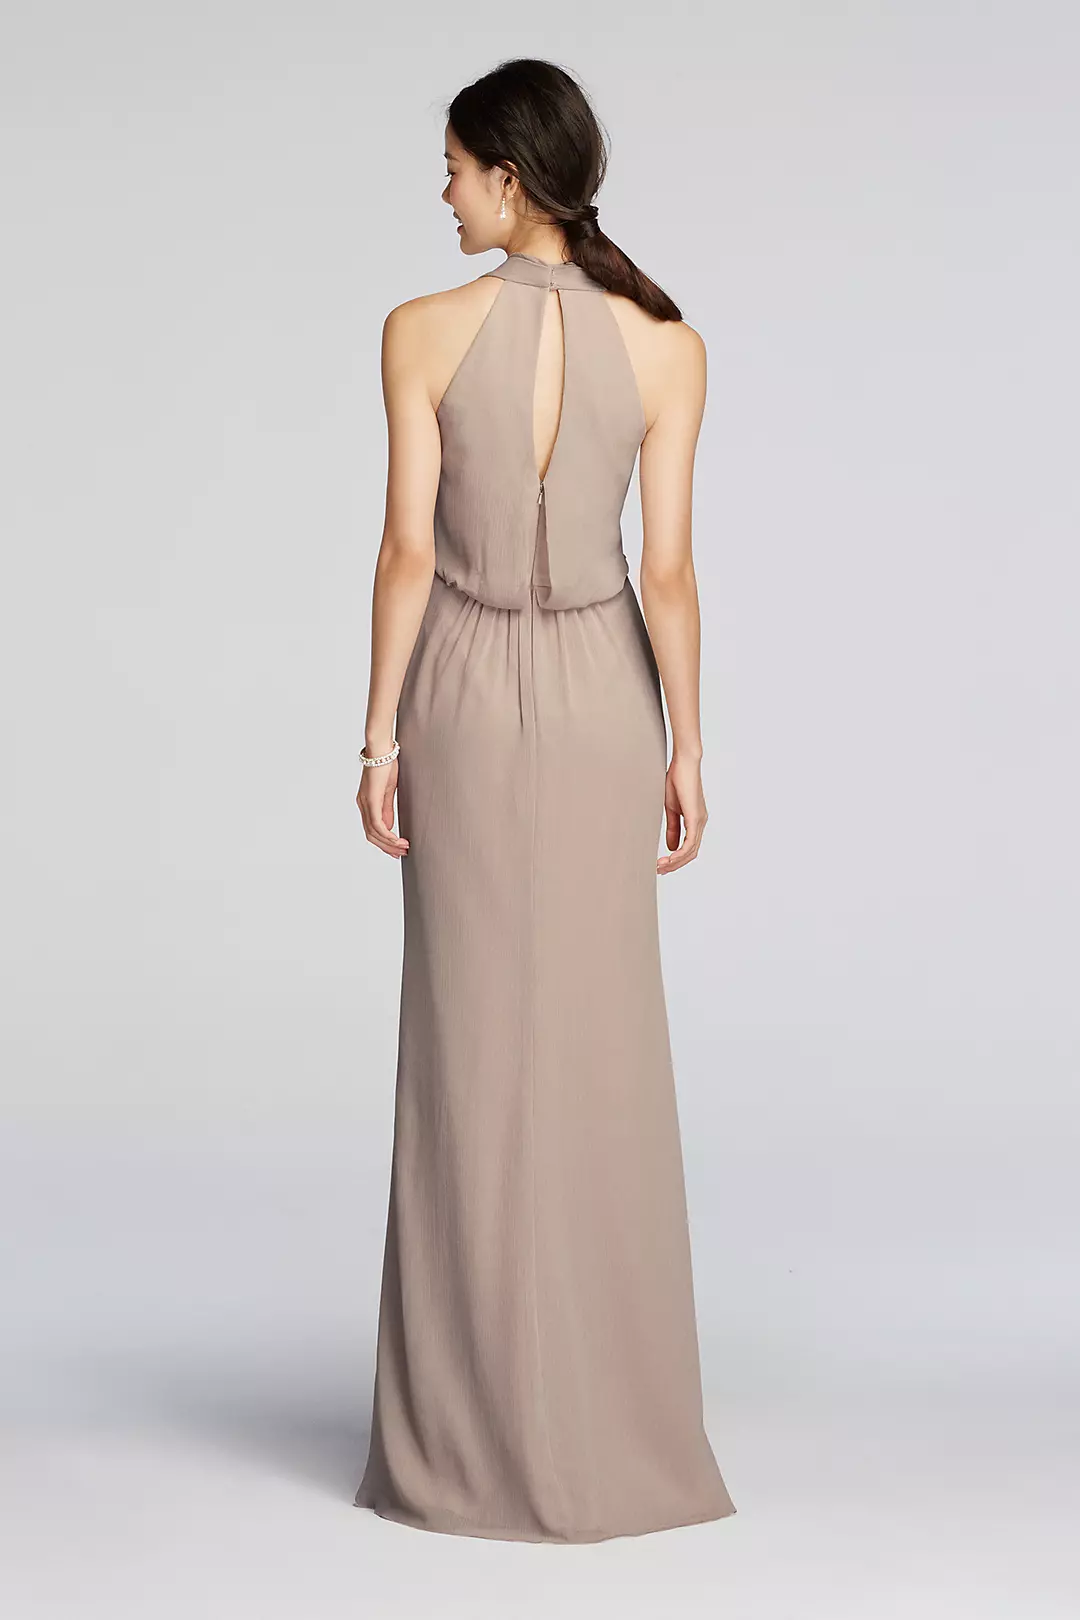 Long Chiffon Dress with Front Cowl Neckline Image 2